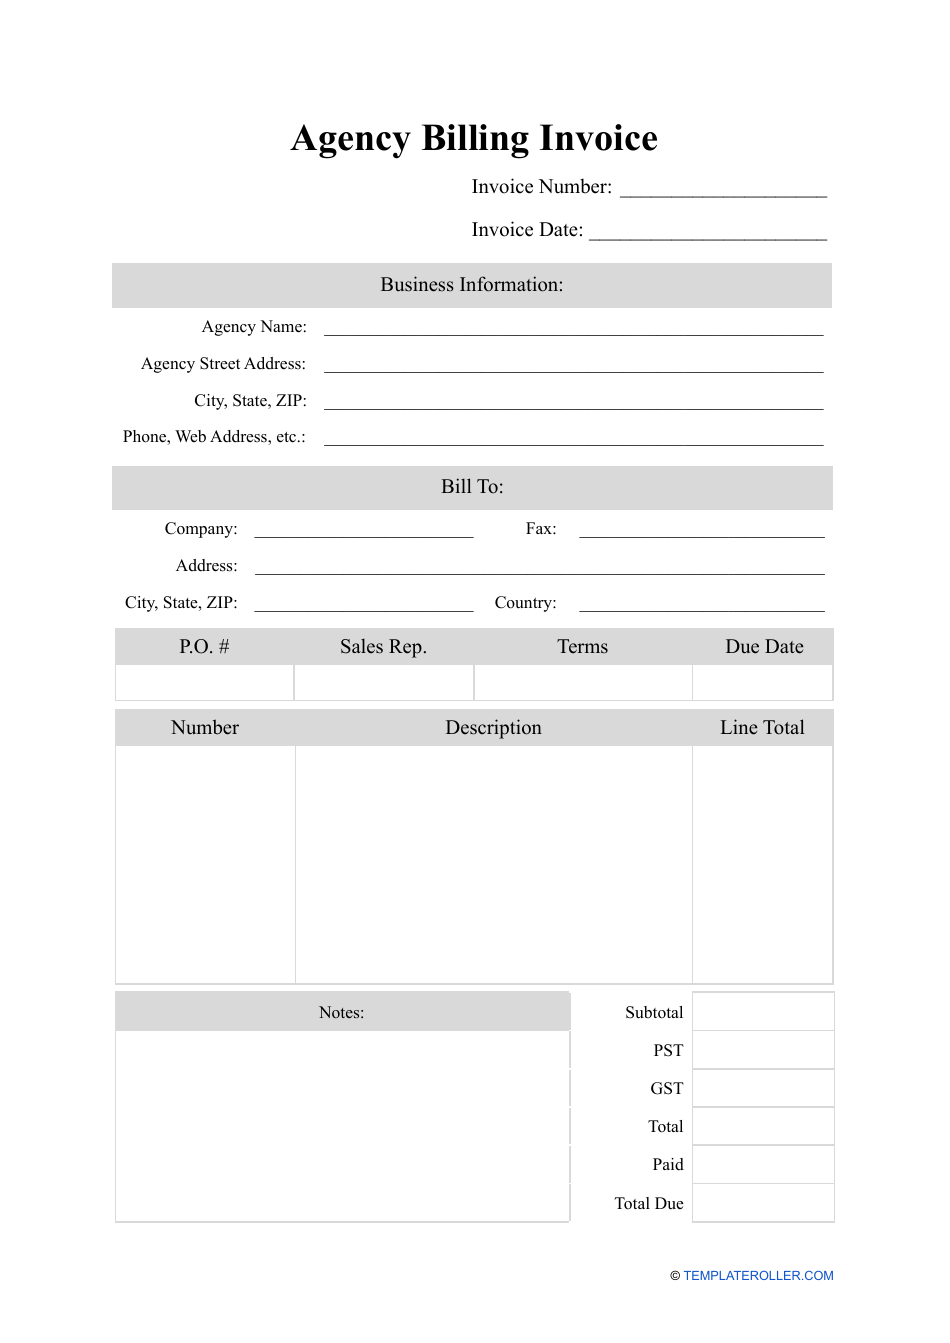 Agency Billing Invoice Template, Page 1